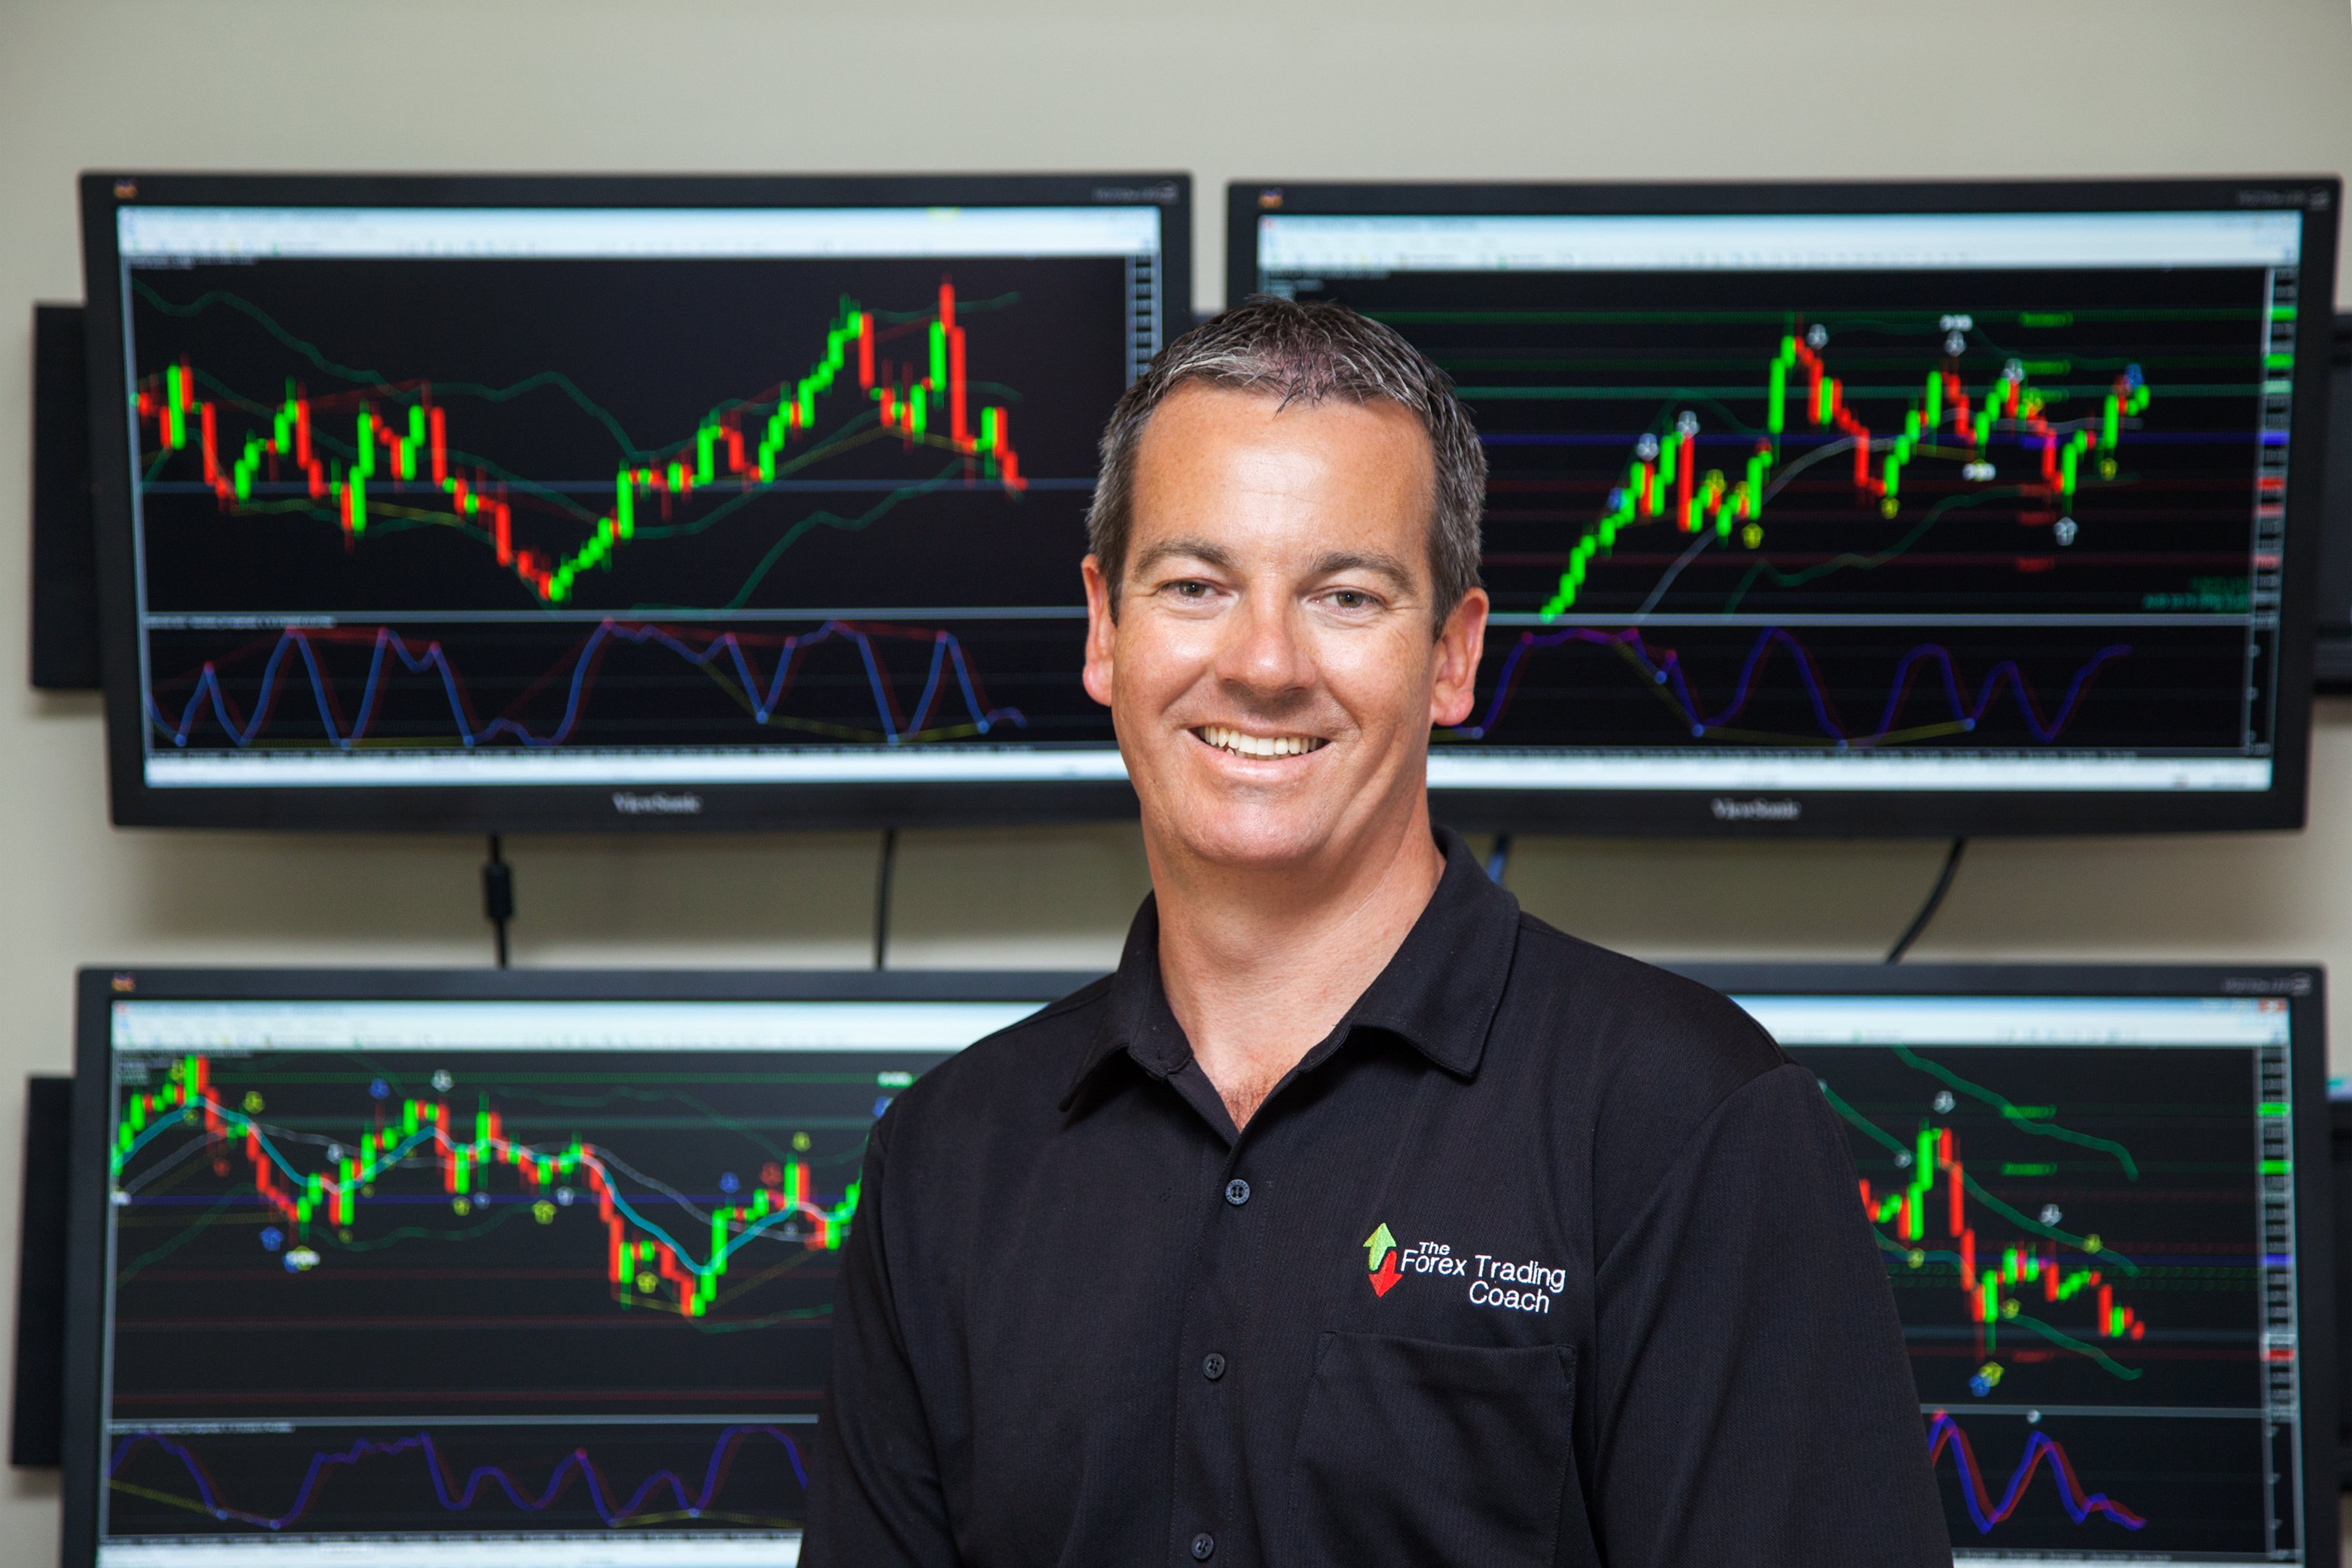 Andrew Mitchem - The Forex Trading Coach